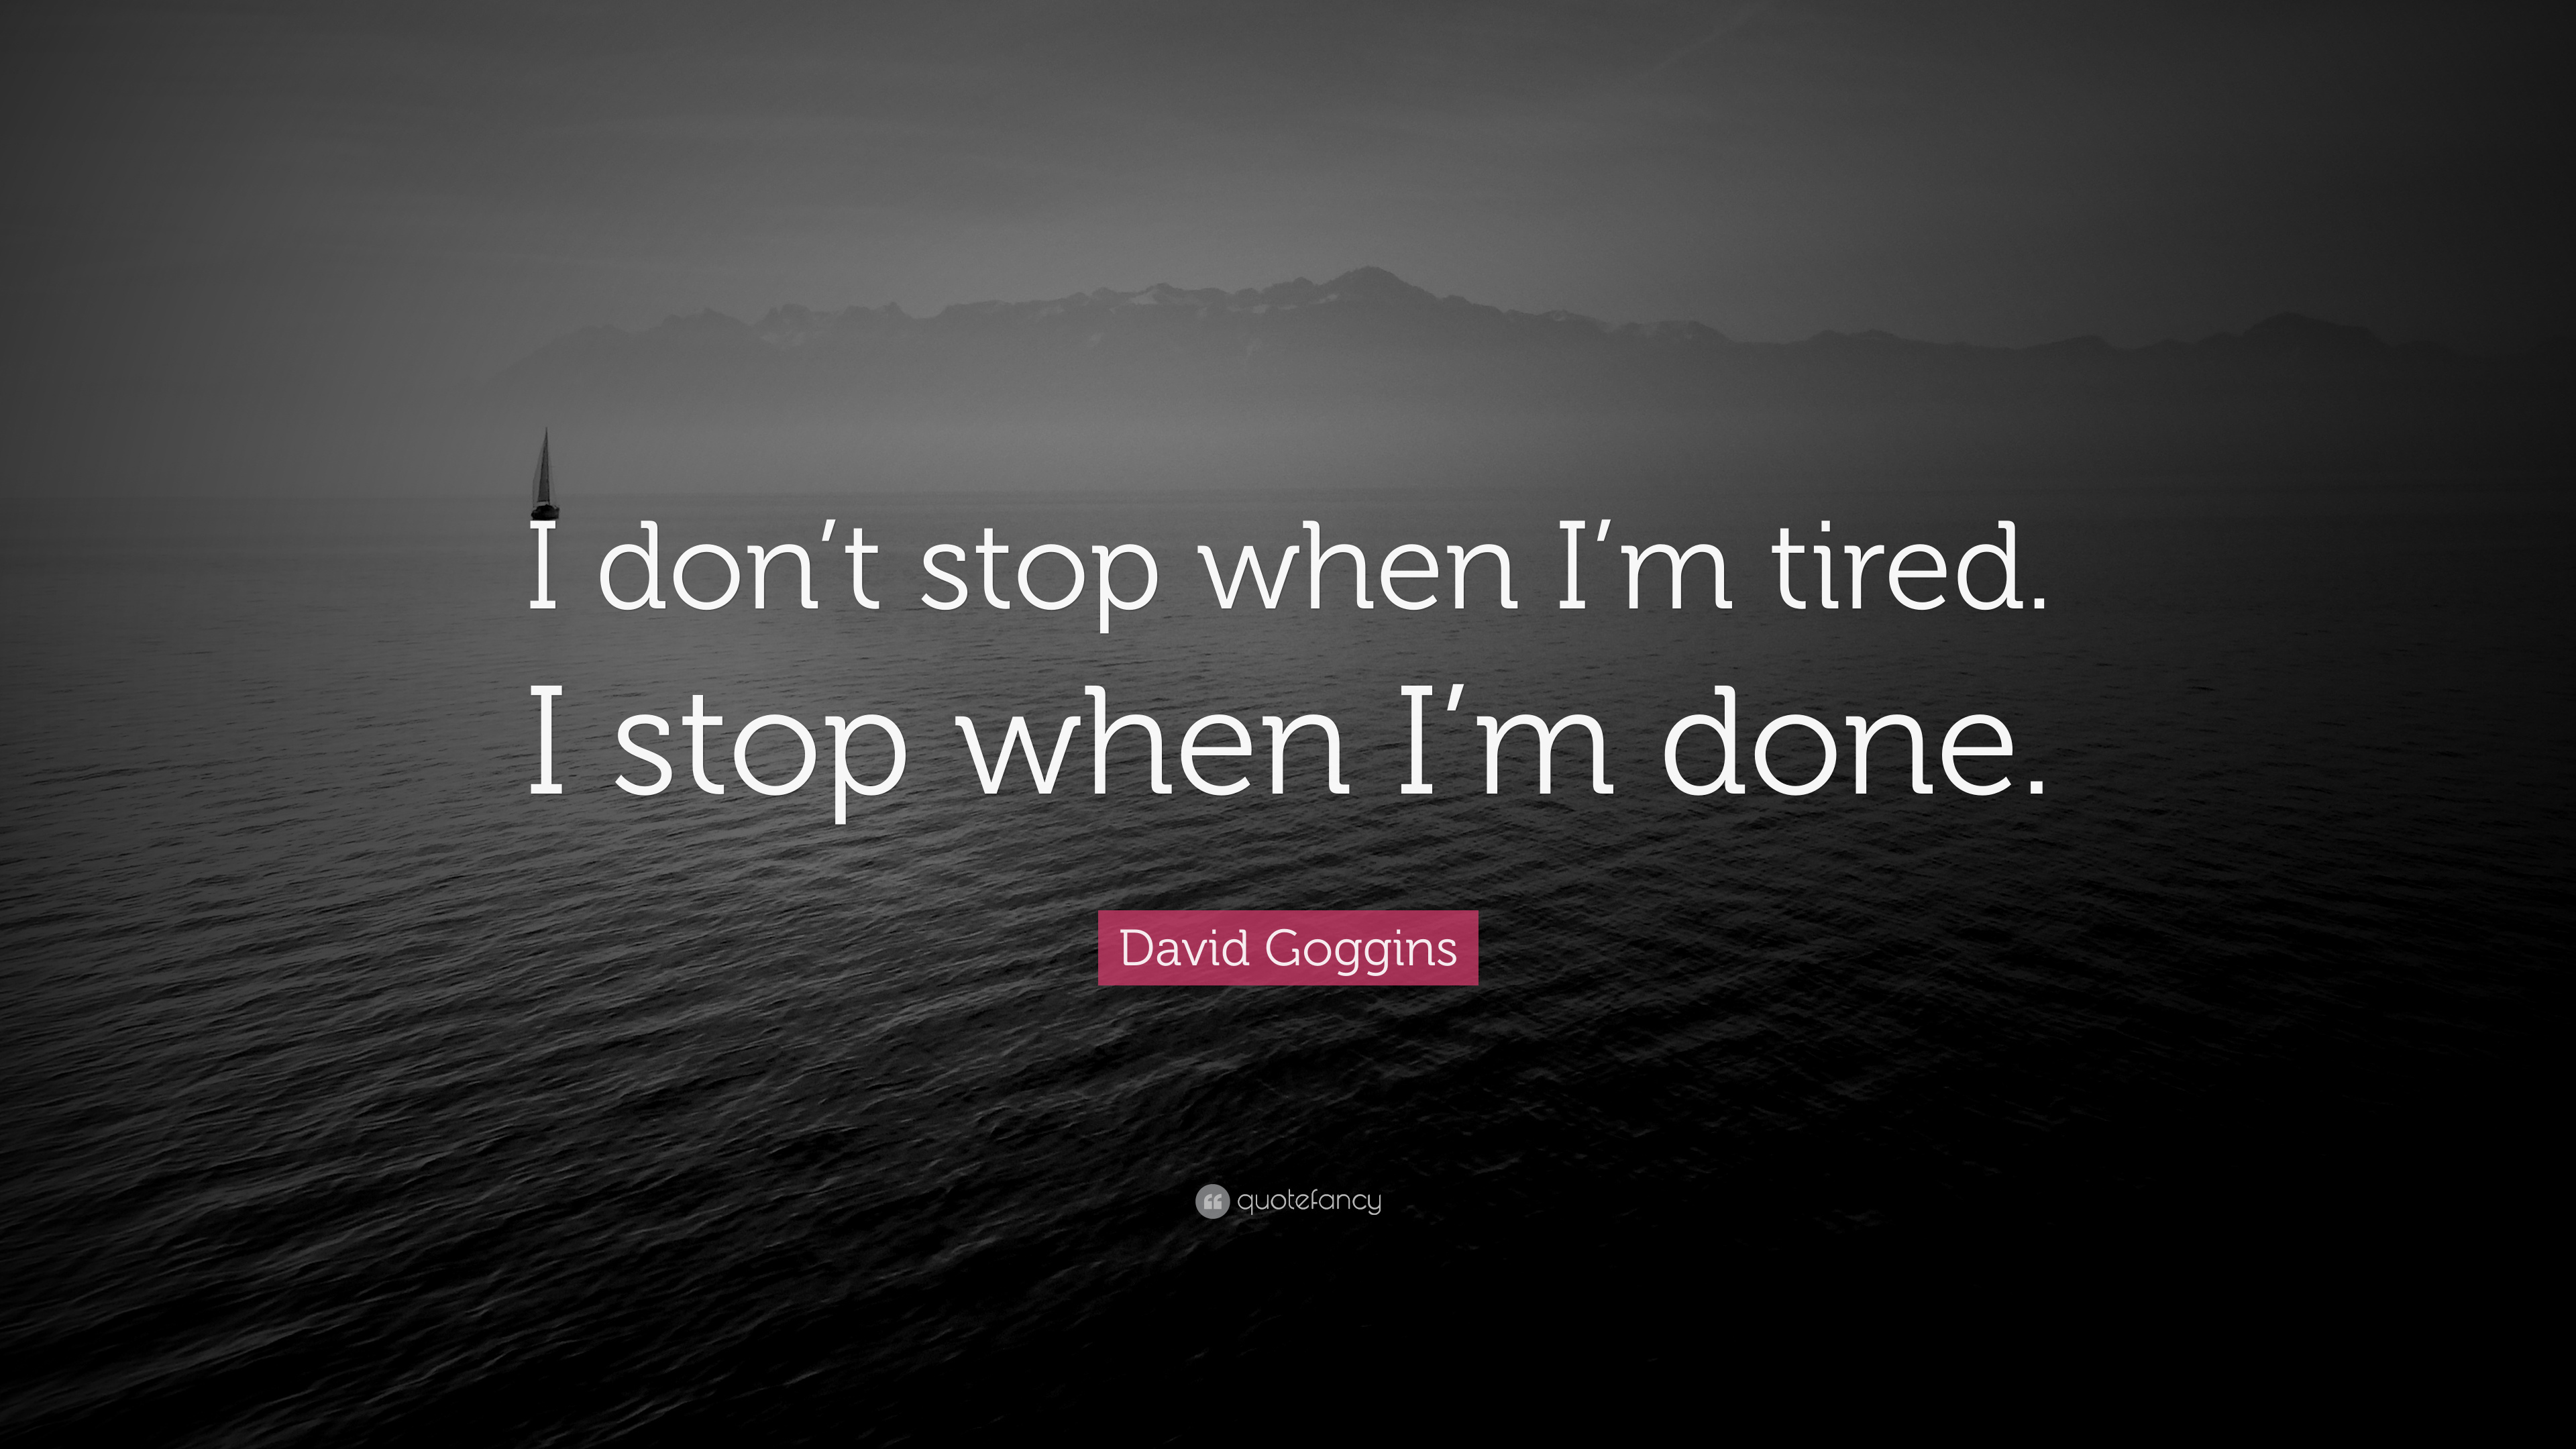 David Goggins Quote: “I don't stop when I'm tired. I stop